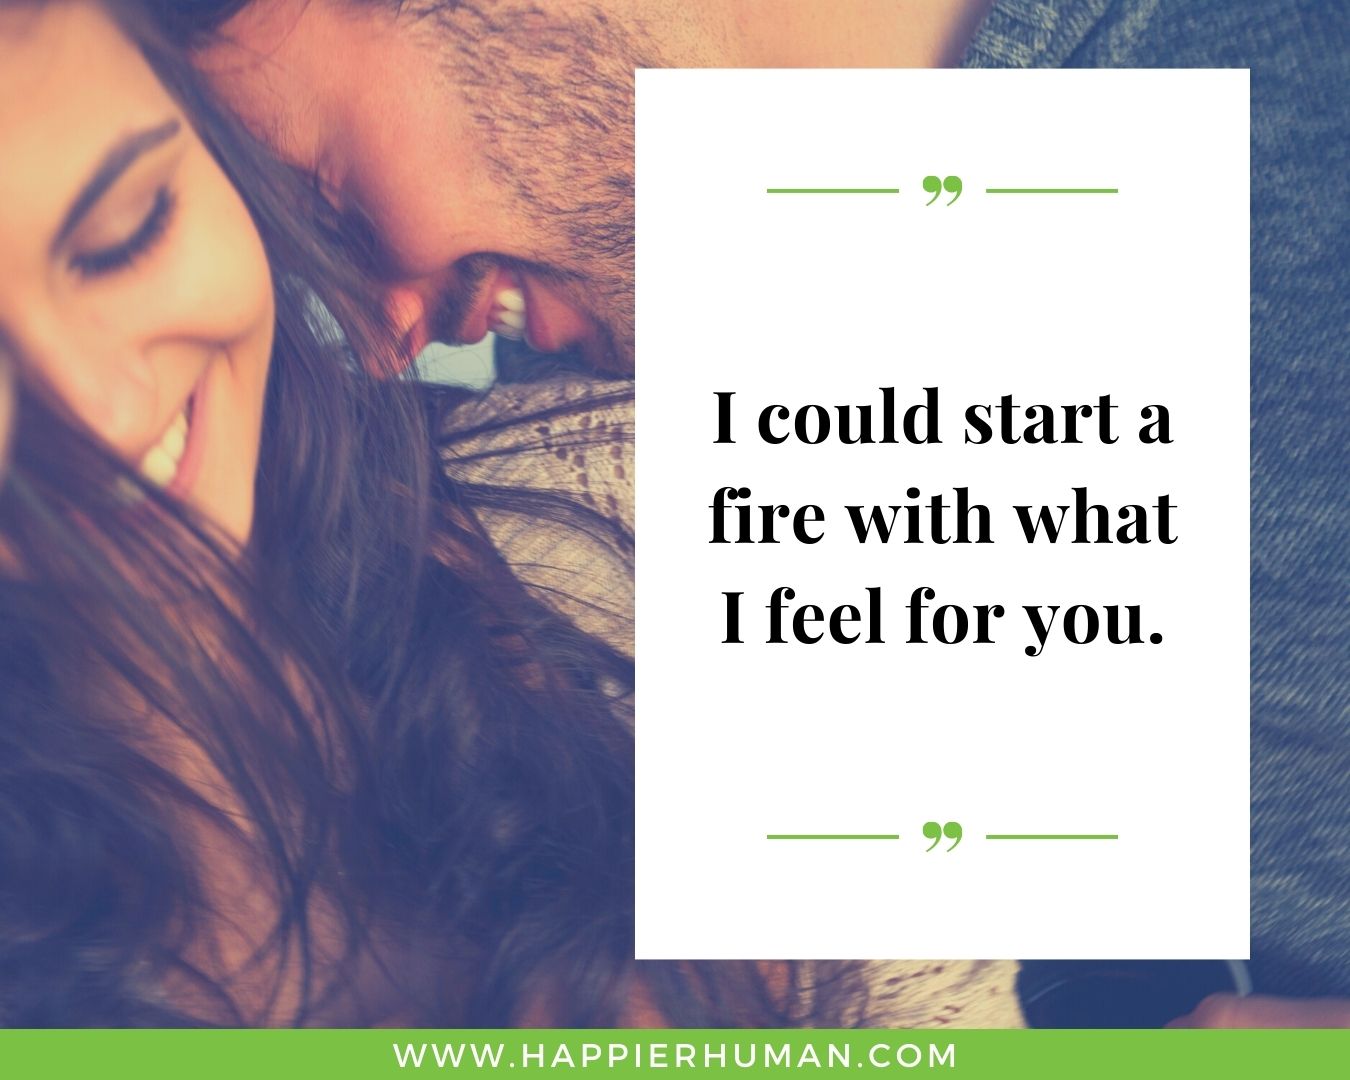 Short, Deep Love Quotes for Her - “I could start a fire with what I feel for you.”